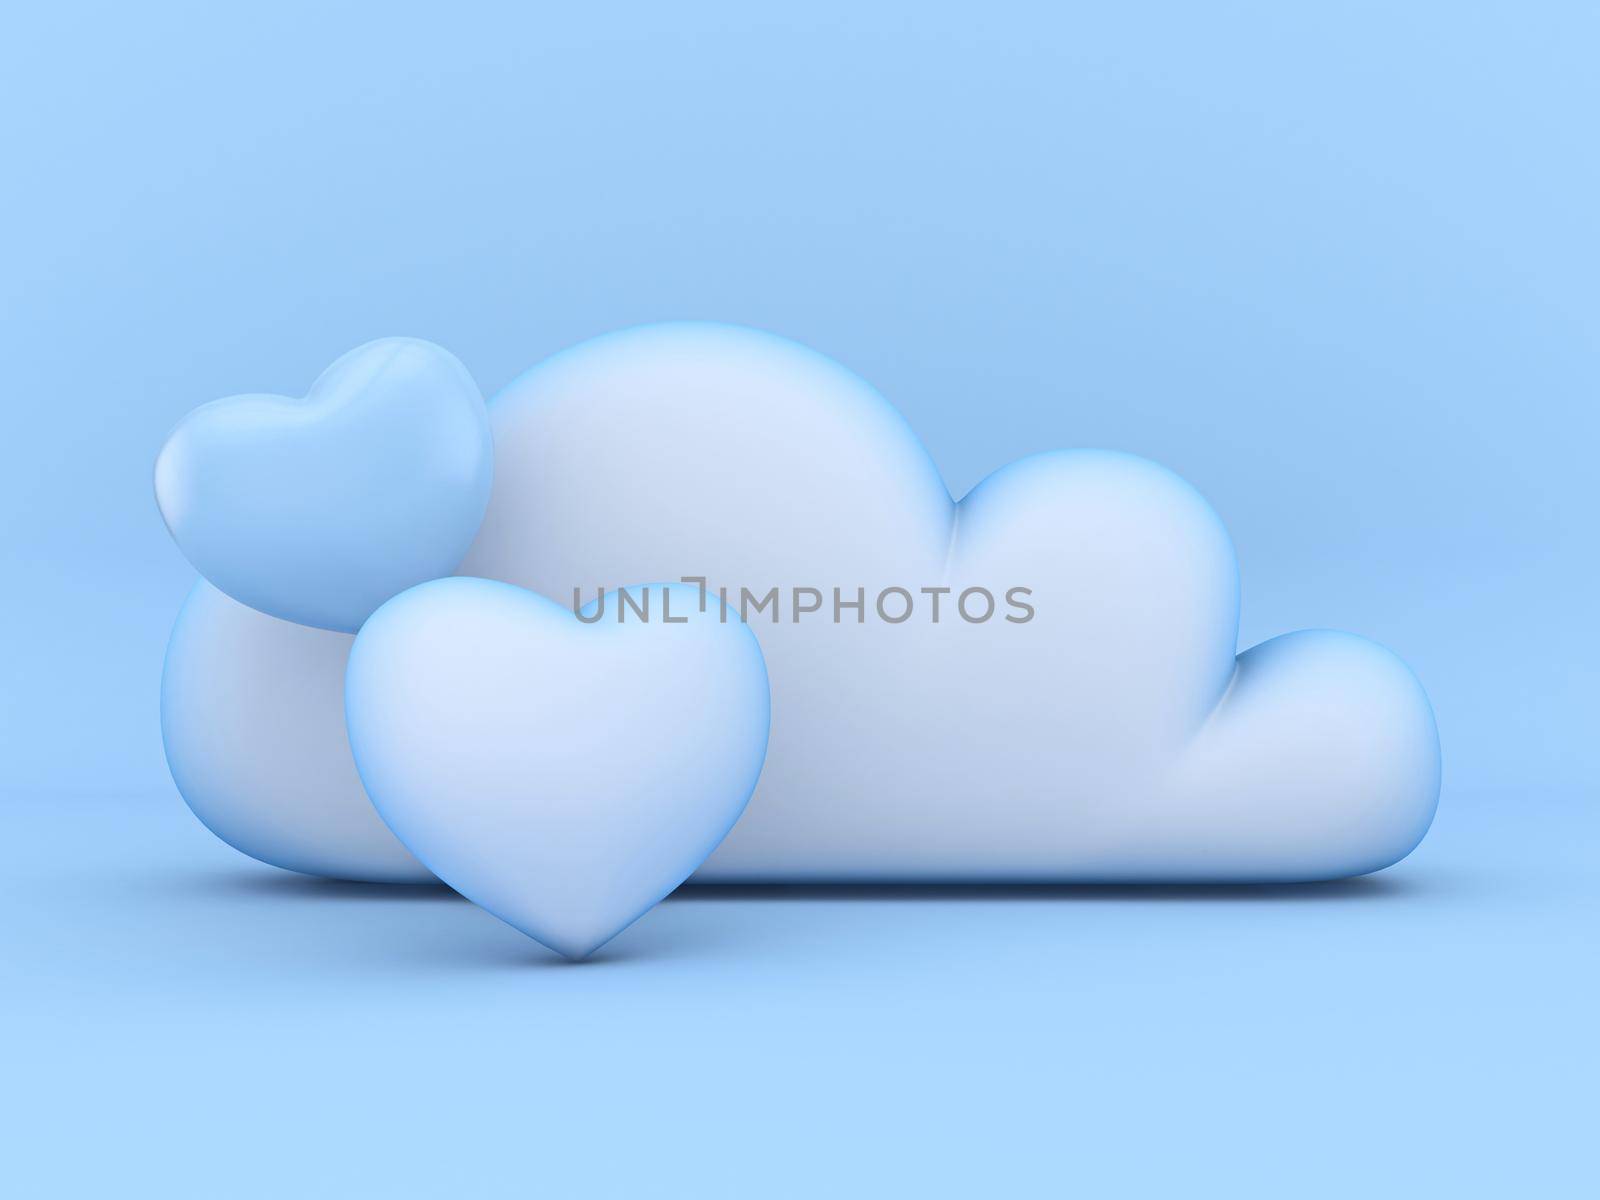 Cloud concept of favorite bookmarks 3D rendering illustration isolated on blue background